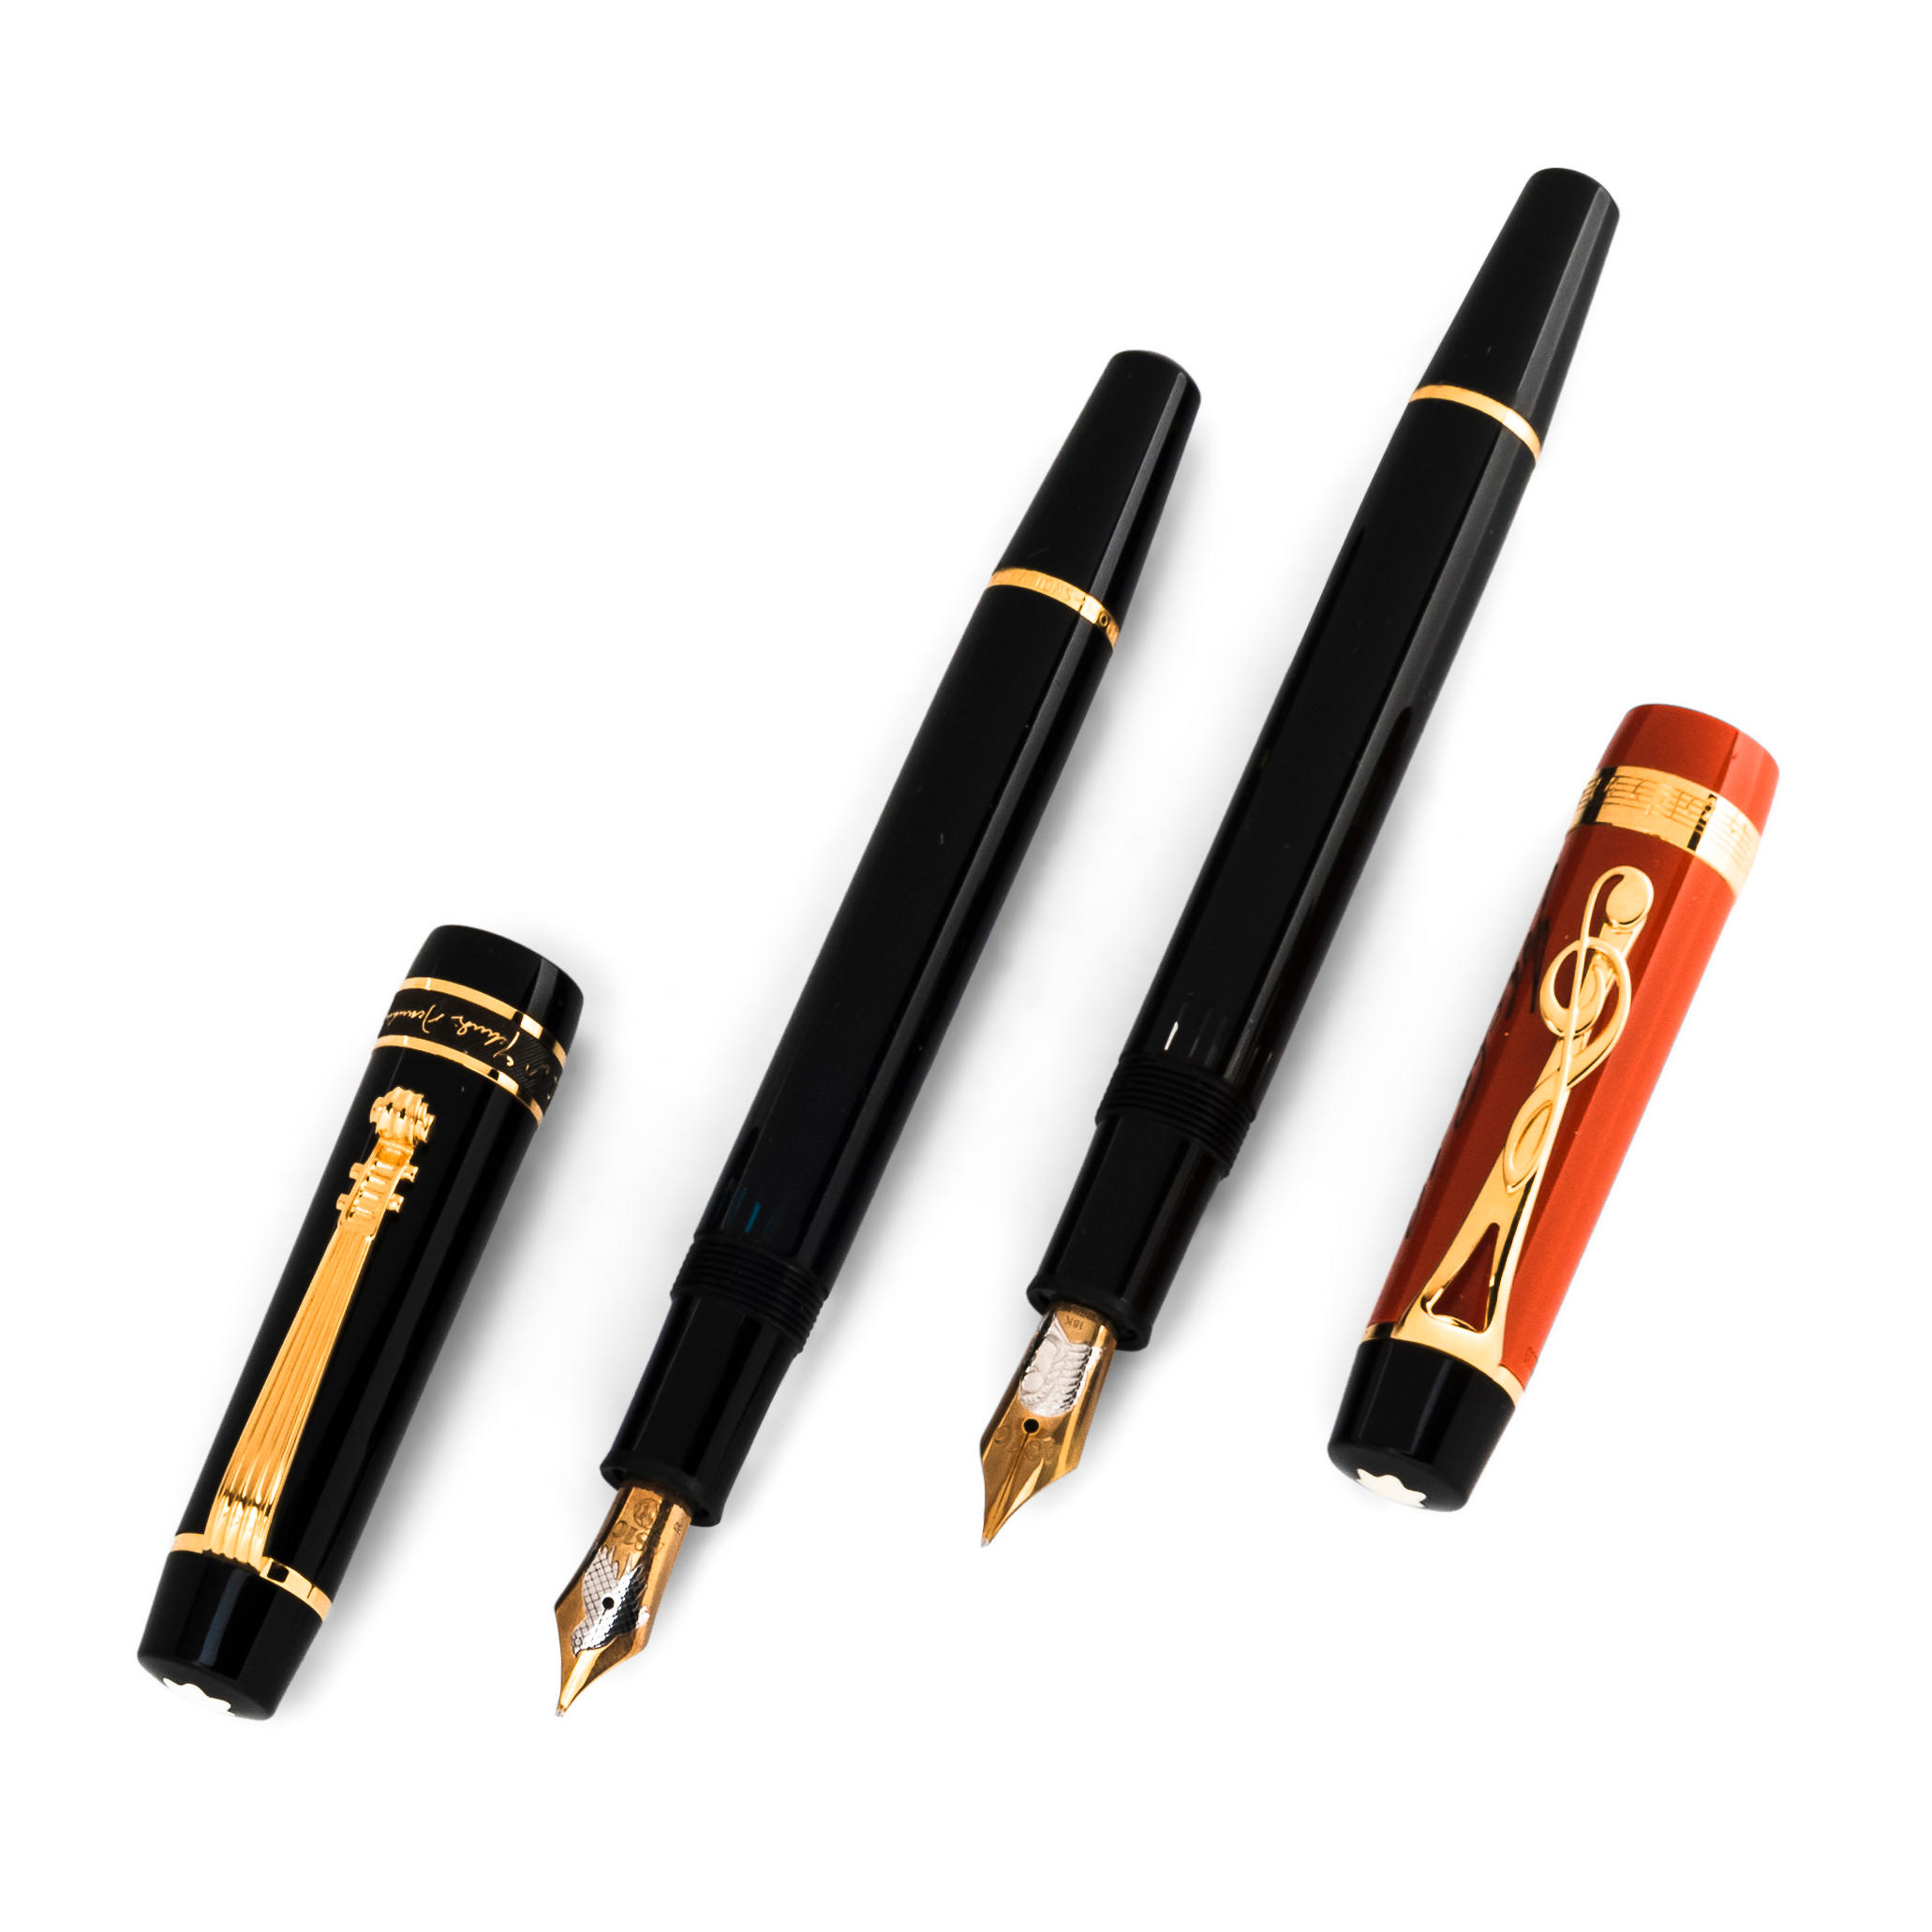 TWO MONTBLANC FOUNTAIN PENS FROM